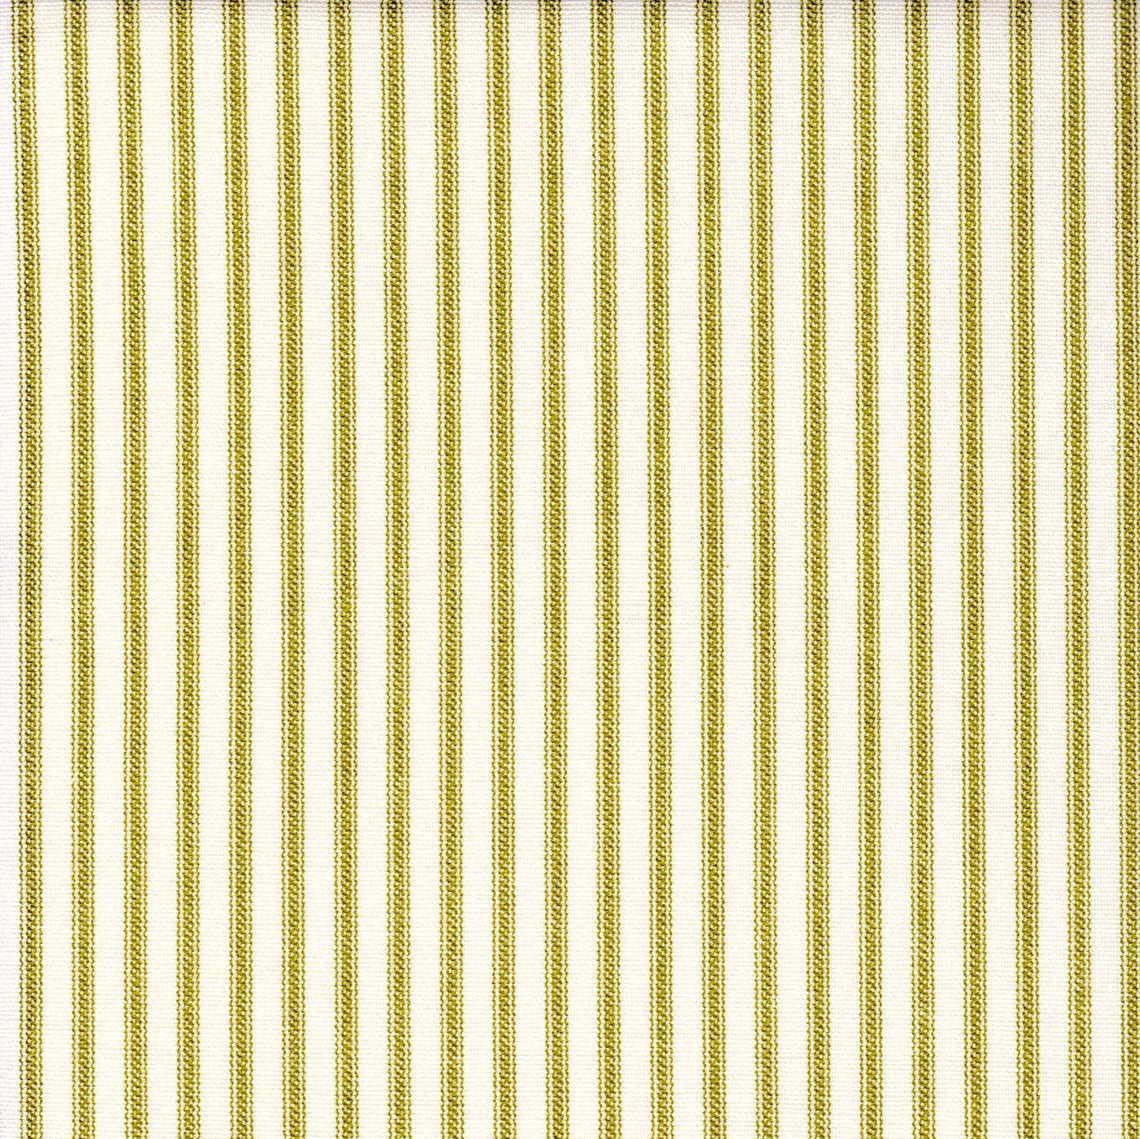 tailored bedskirt in farmhouse meadow green ticking stripe on cream